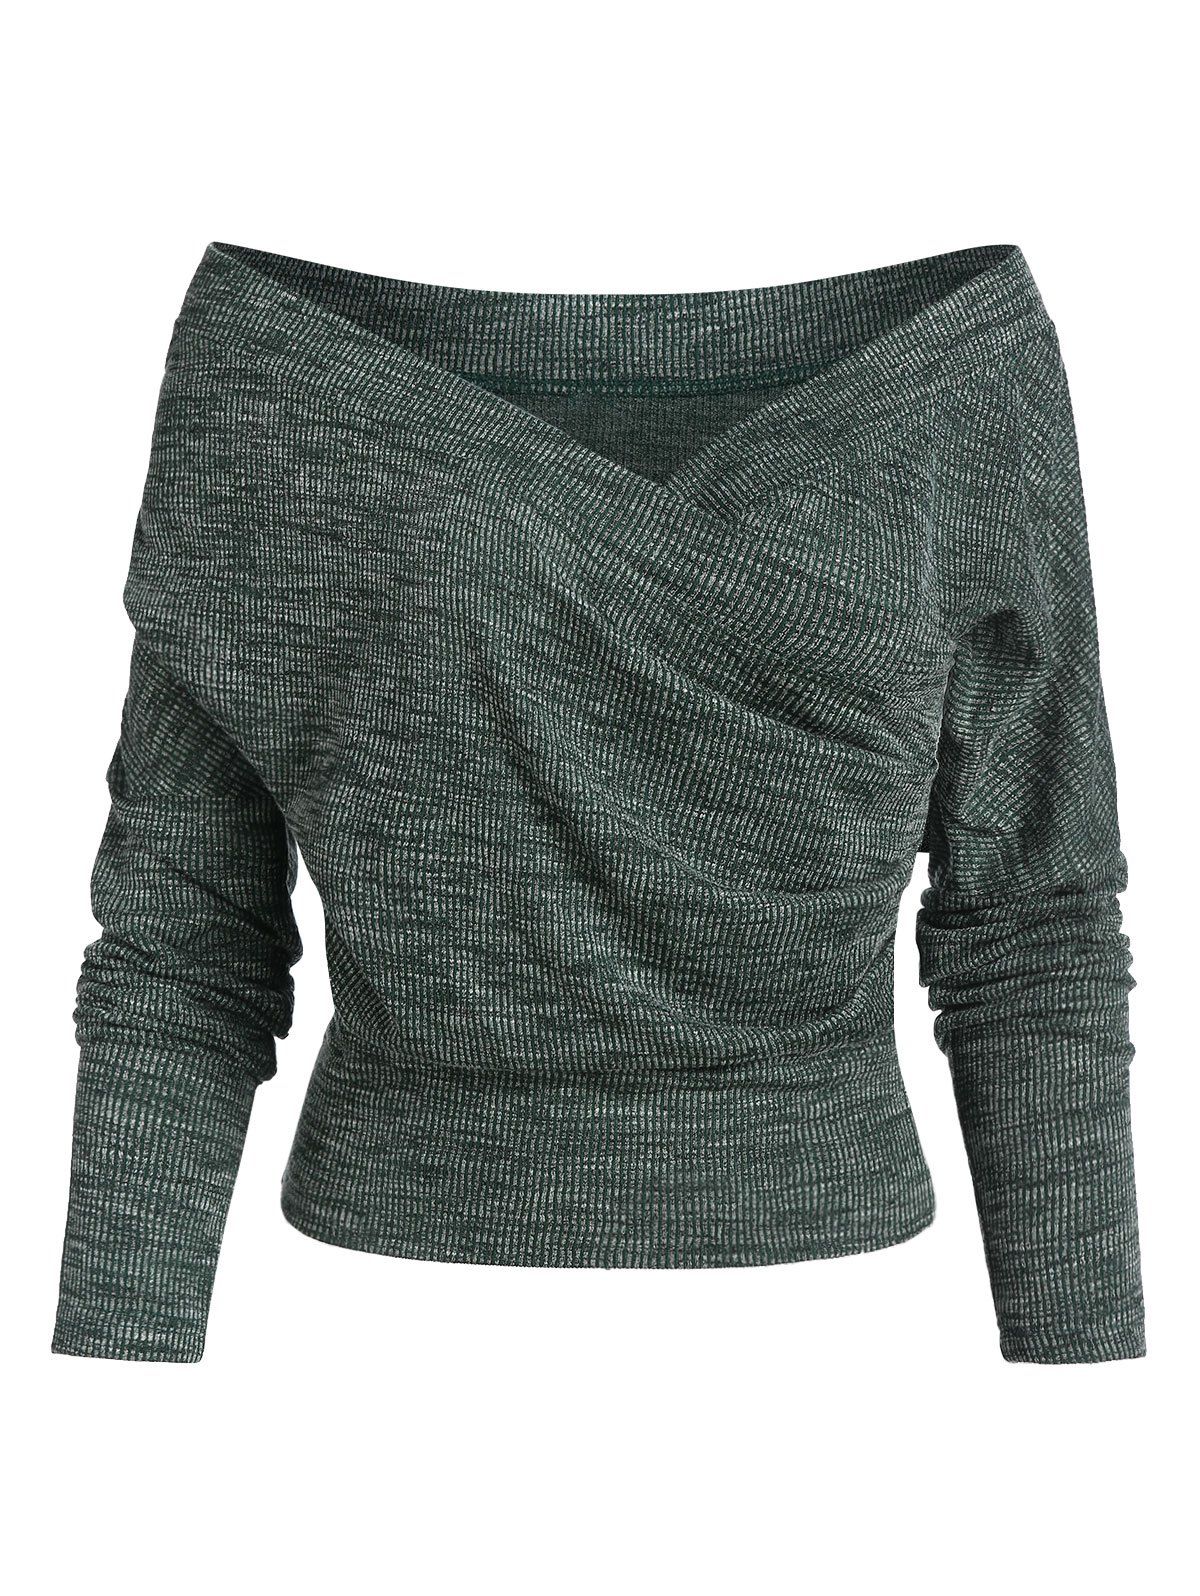 Off The Shoulder Heathered Ribbed Surplice Sweater - MEDIUM SEA GREEN 3XL.